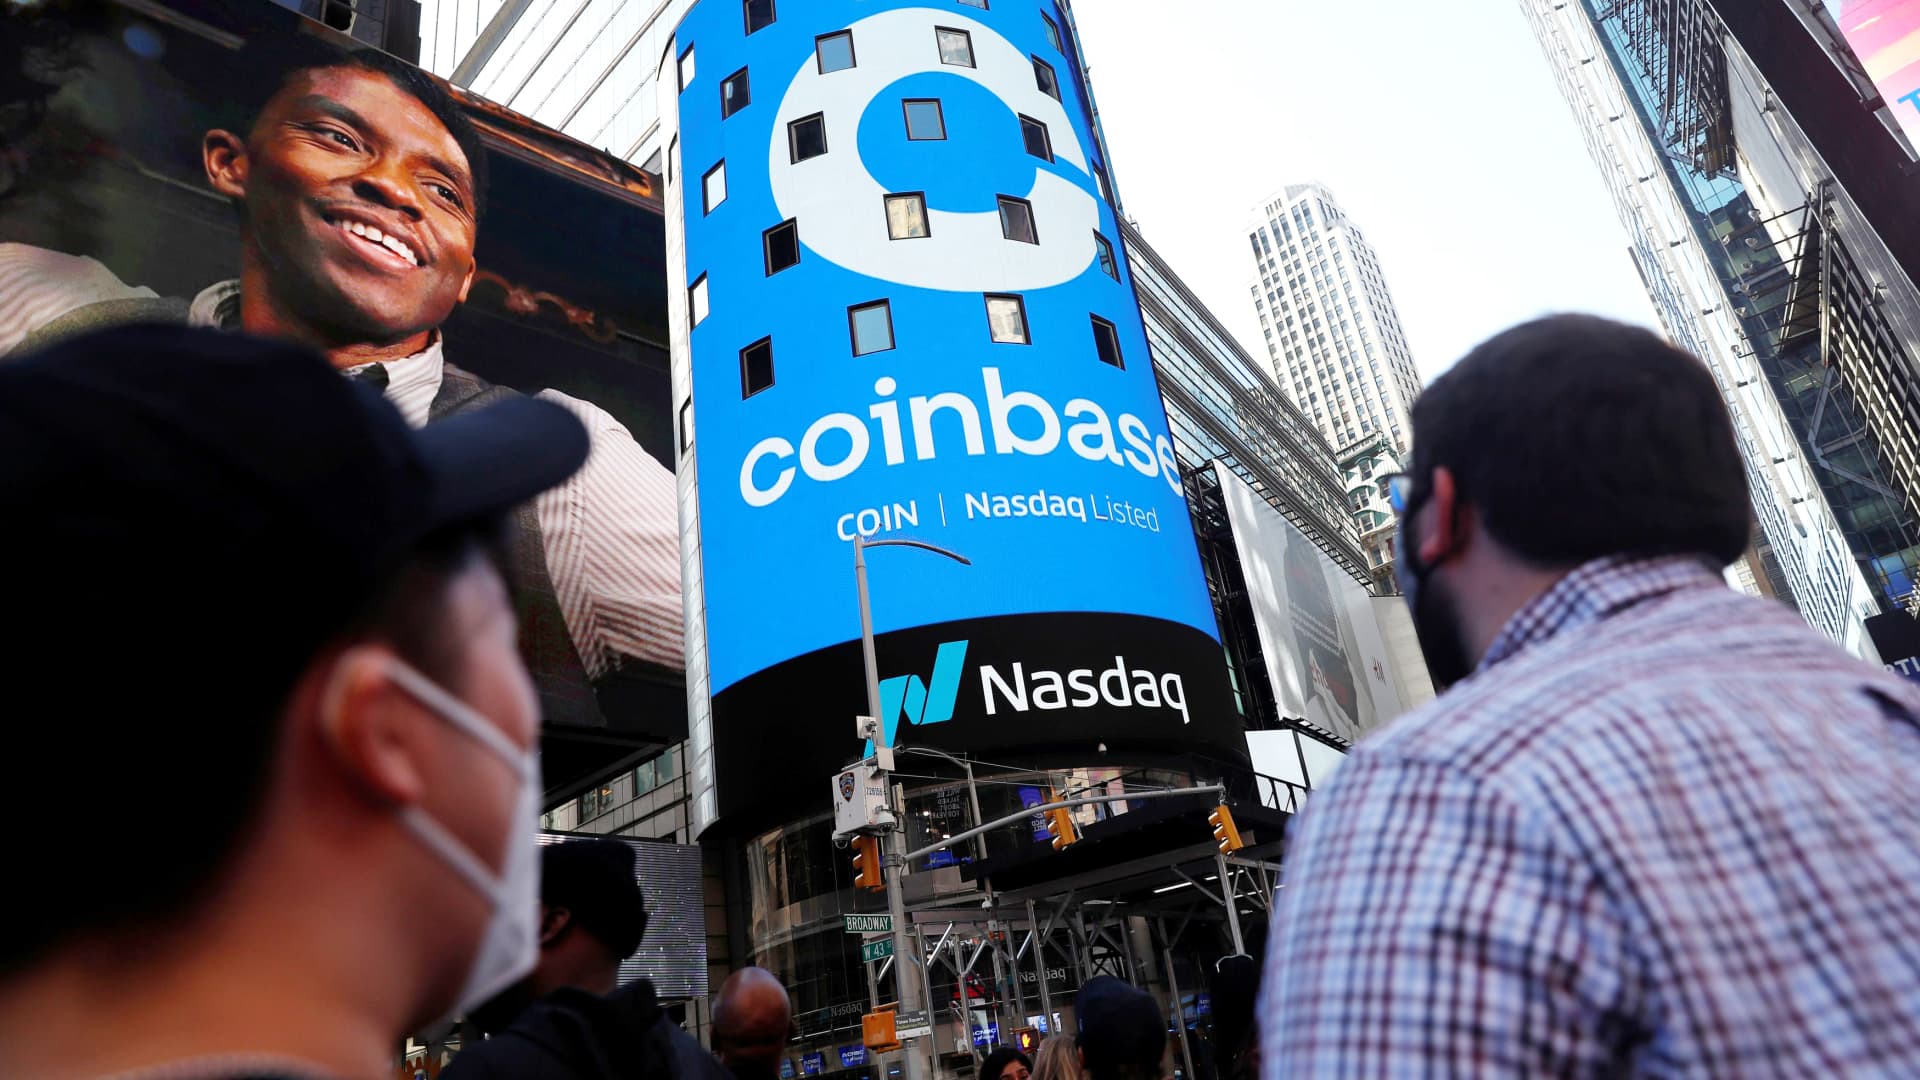 Coinbase shares tumble after report that it’s facing SEC probe